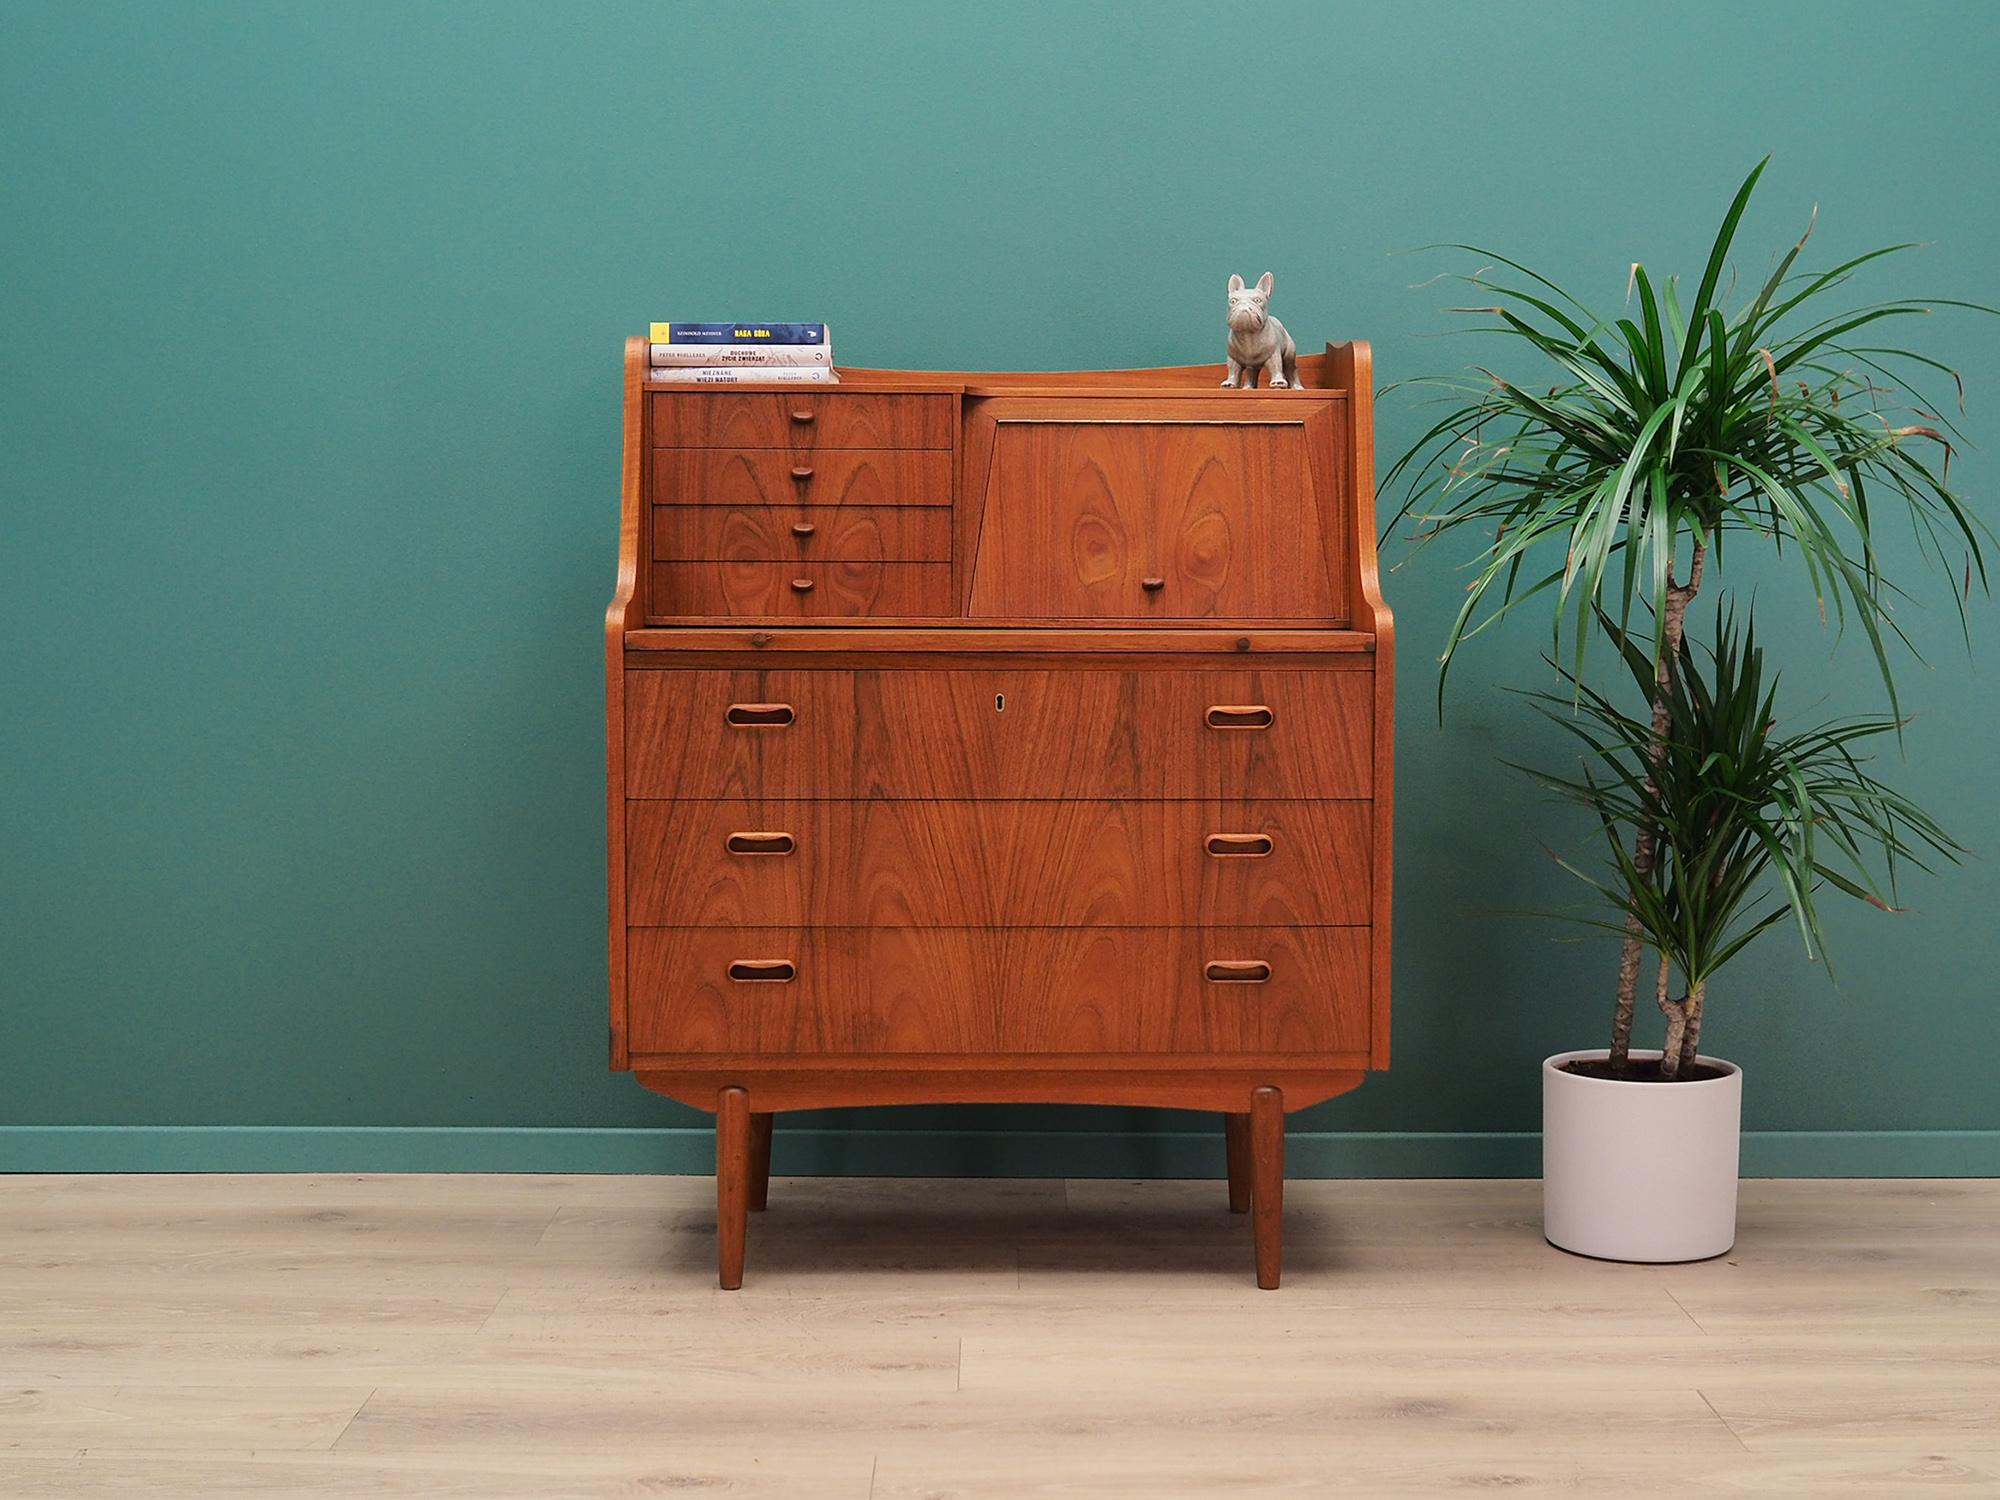 Classic secretary from the 1960s-1970s. Scandinavian design, Minimalist form. Furniture made in AG Spejl Kobberbeskyttet manufactory, all covered with teak veneer, legs made of solid teak wood. Secretary has a pull-out bar, also four stylish drawers